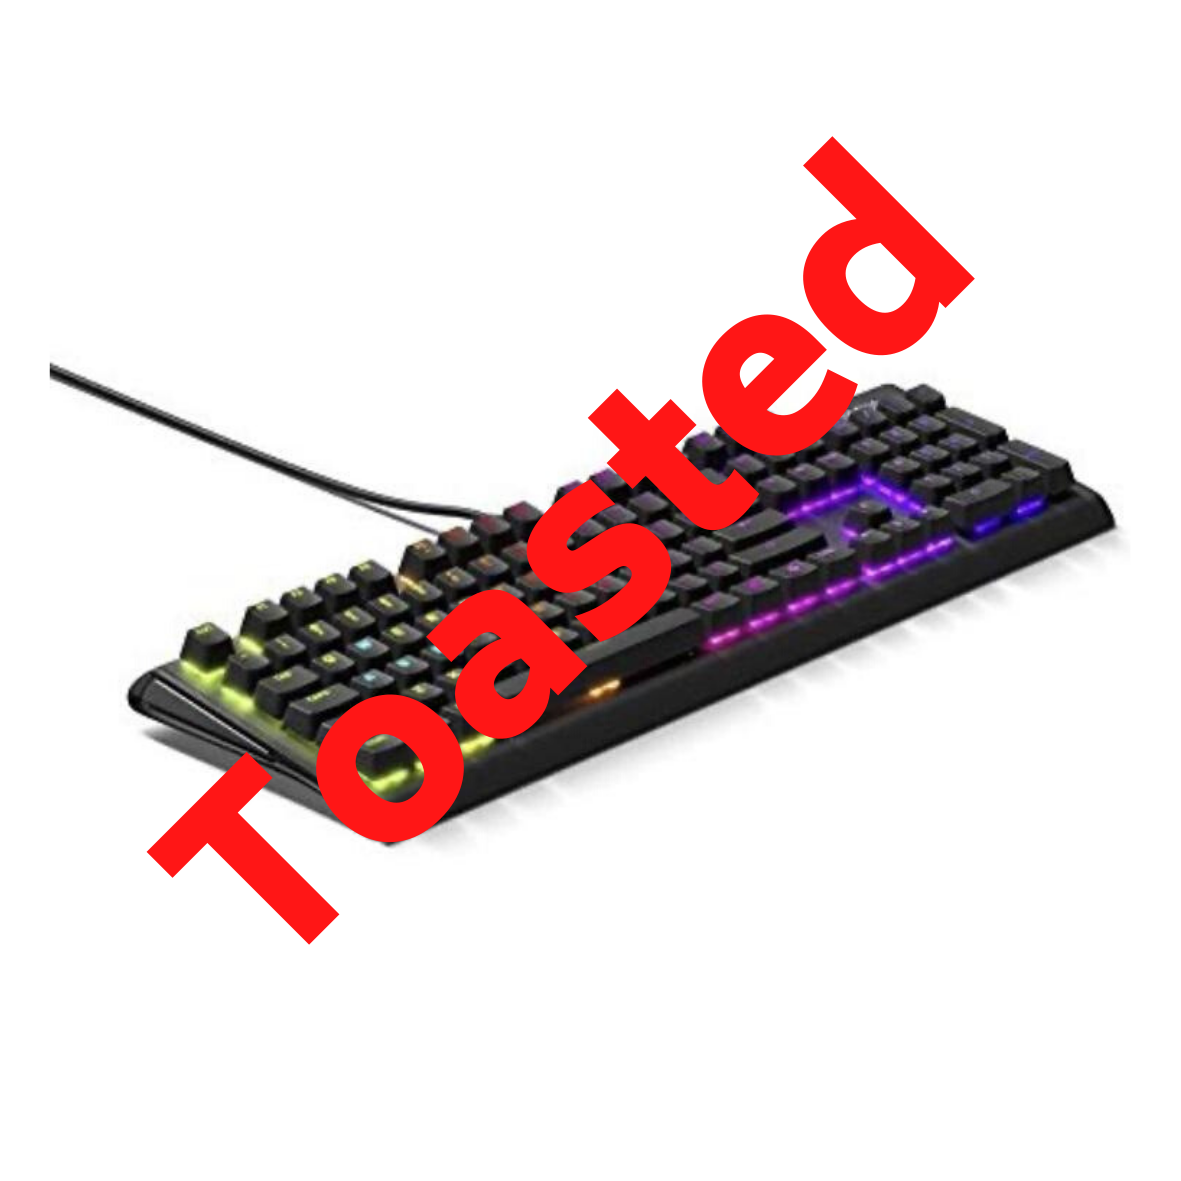 SteelSeries Apex M750 RGB Mechanical Gaming Keyboard - Aluminum Frame - RGB LED Backlit - Linear & Quiet Switch - Discord Notifications